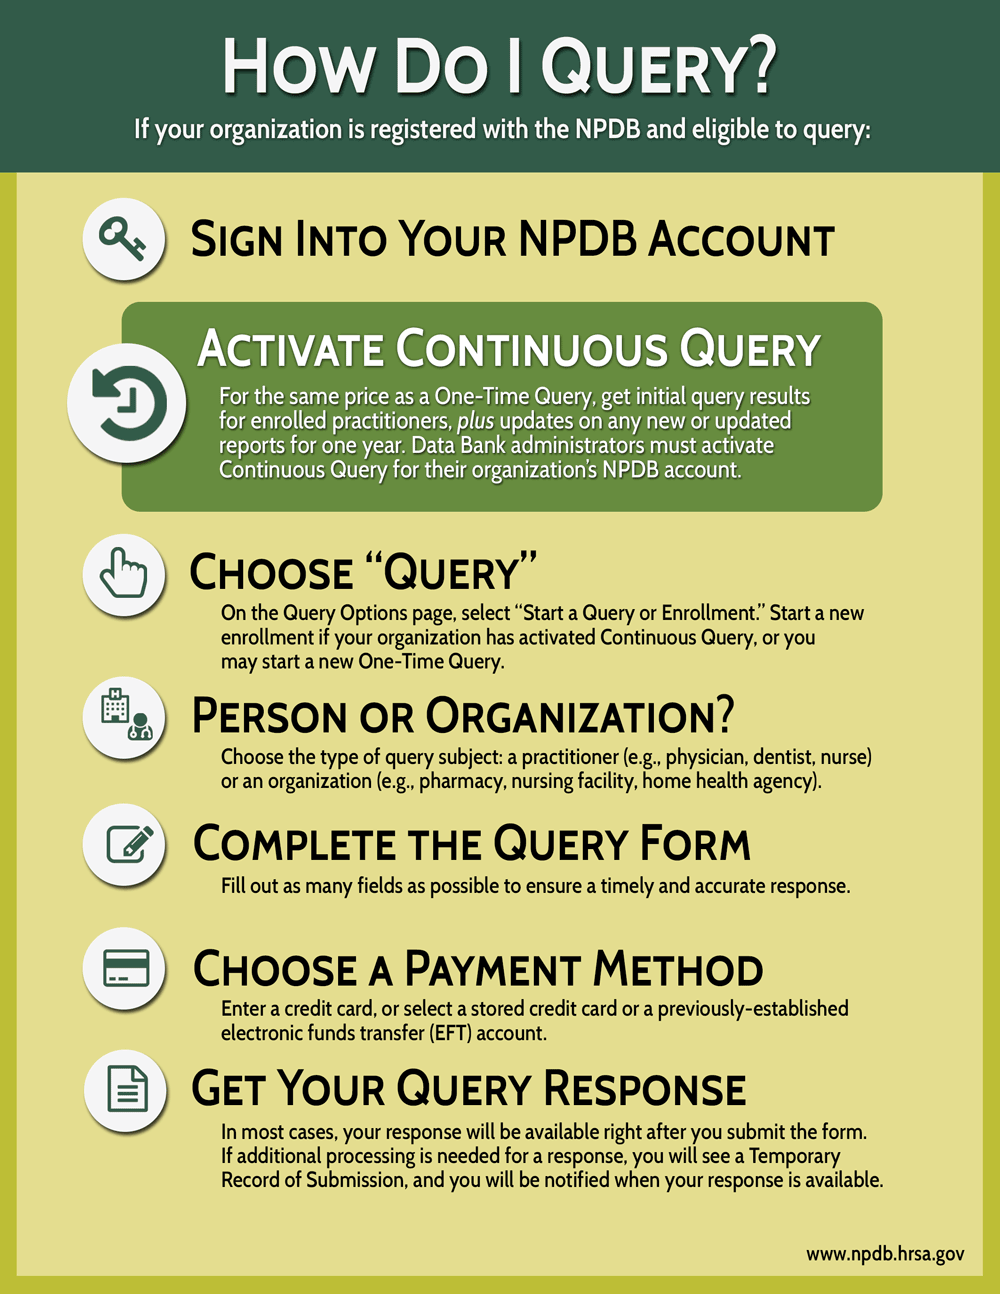 Mini Image of the How to Query Infographic